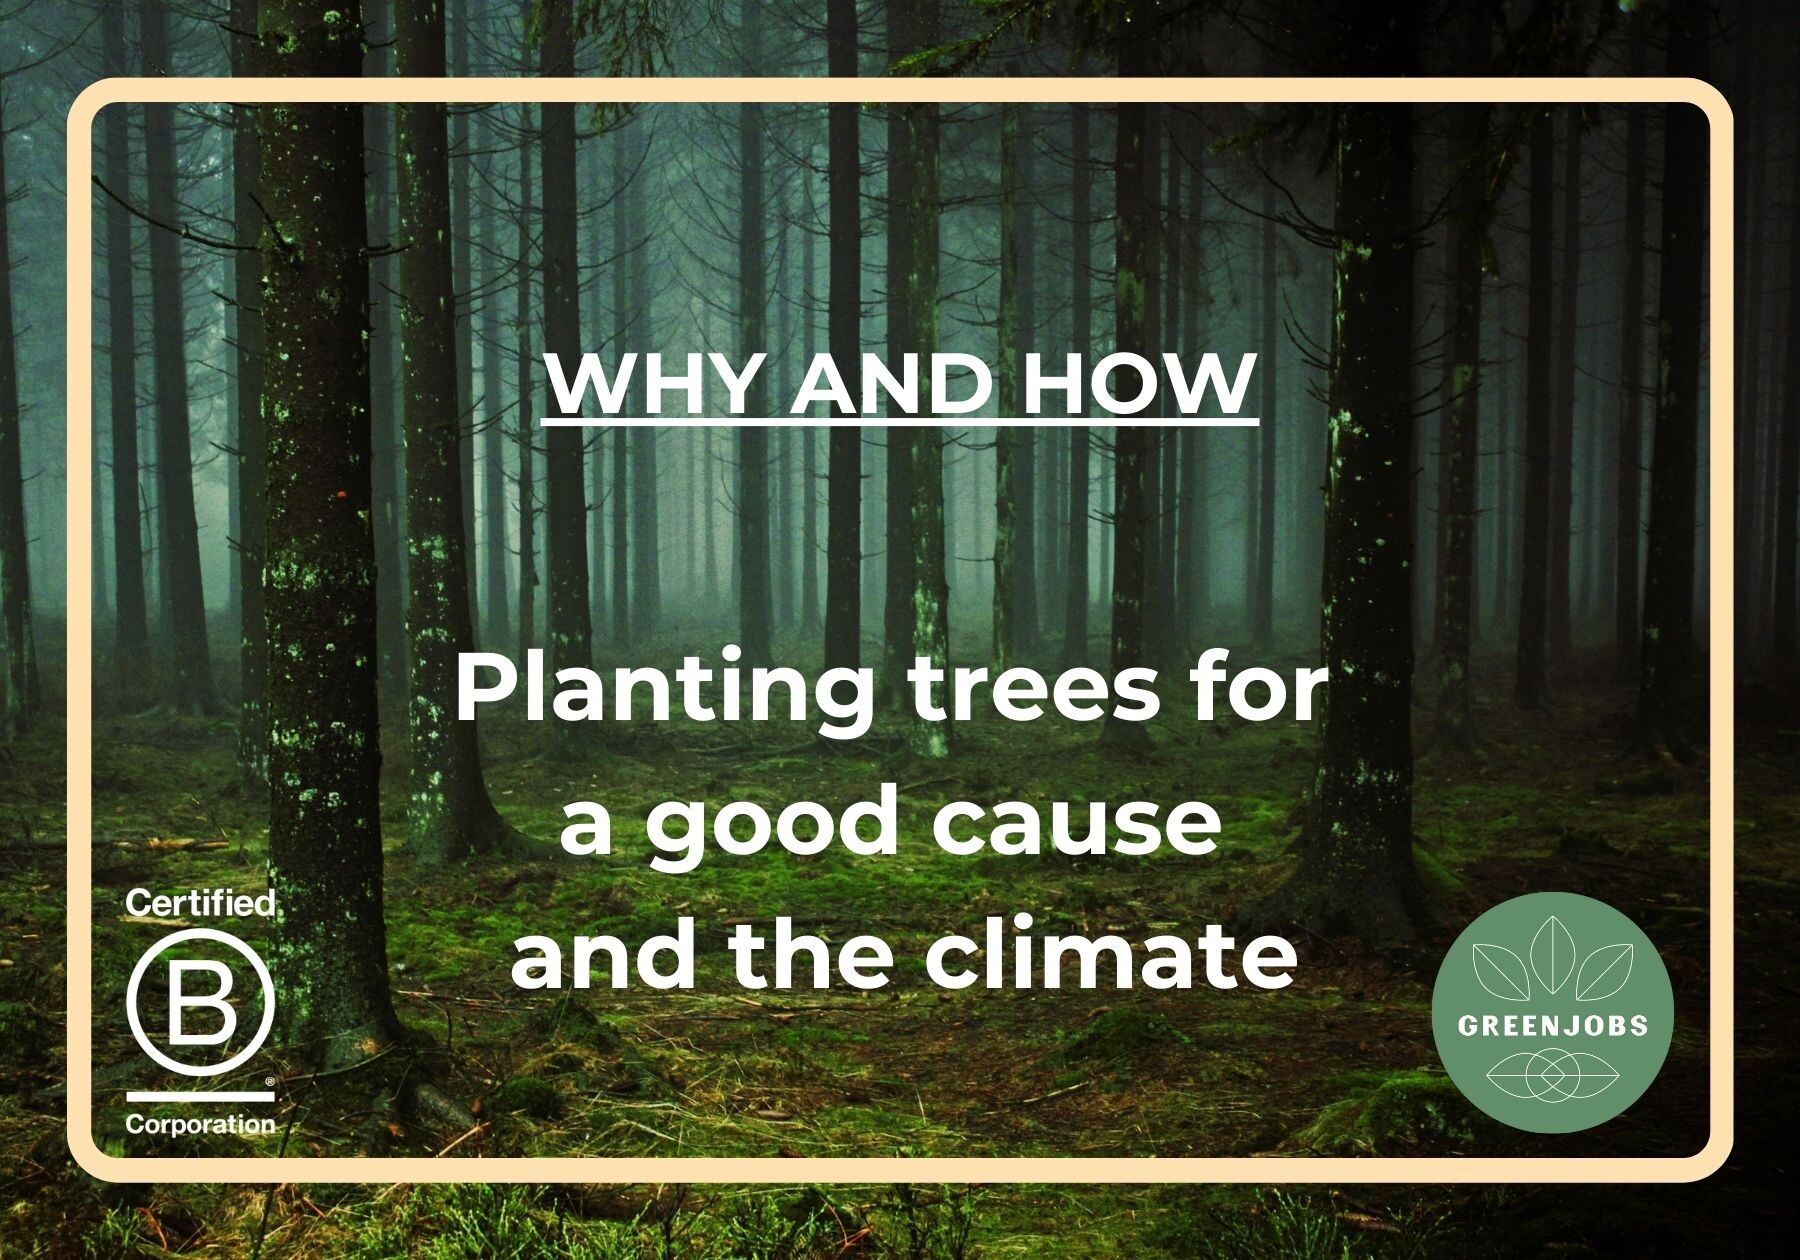 Planting Trees for a good cause and the climate